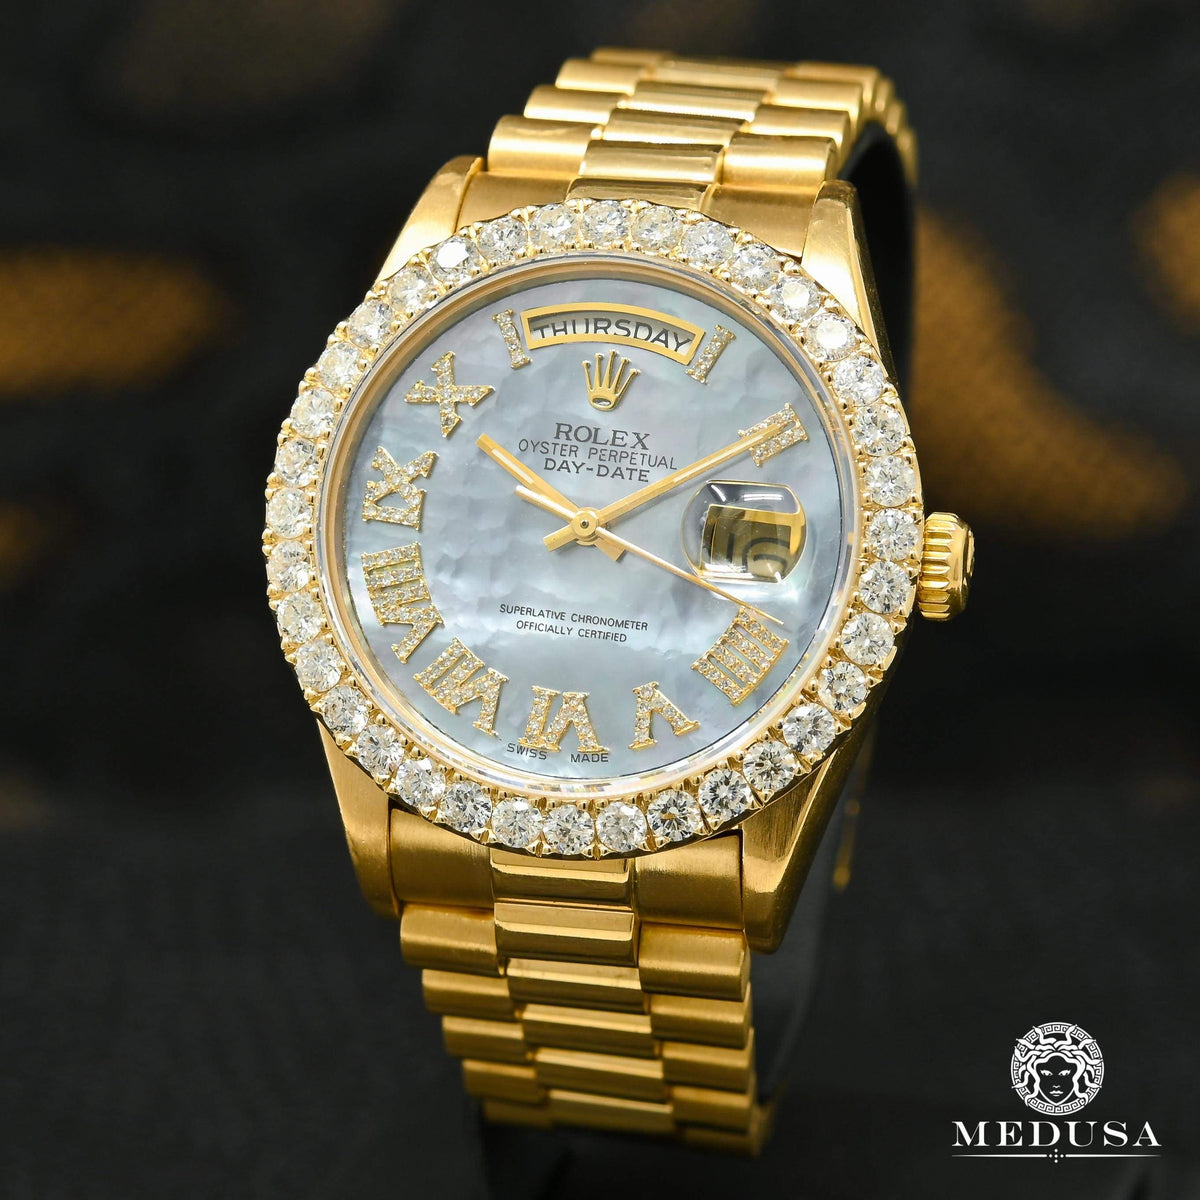 Montre Rolex | Montre Homme Rolex Day-Date 36mm - Cyan ’’Mother Of Pearl’’ Romain / Or Jaune